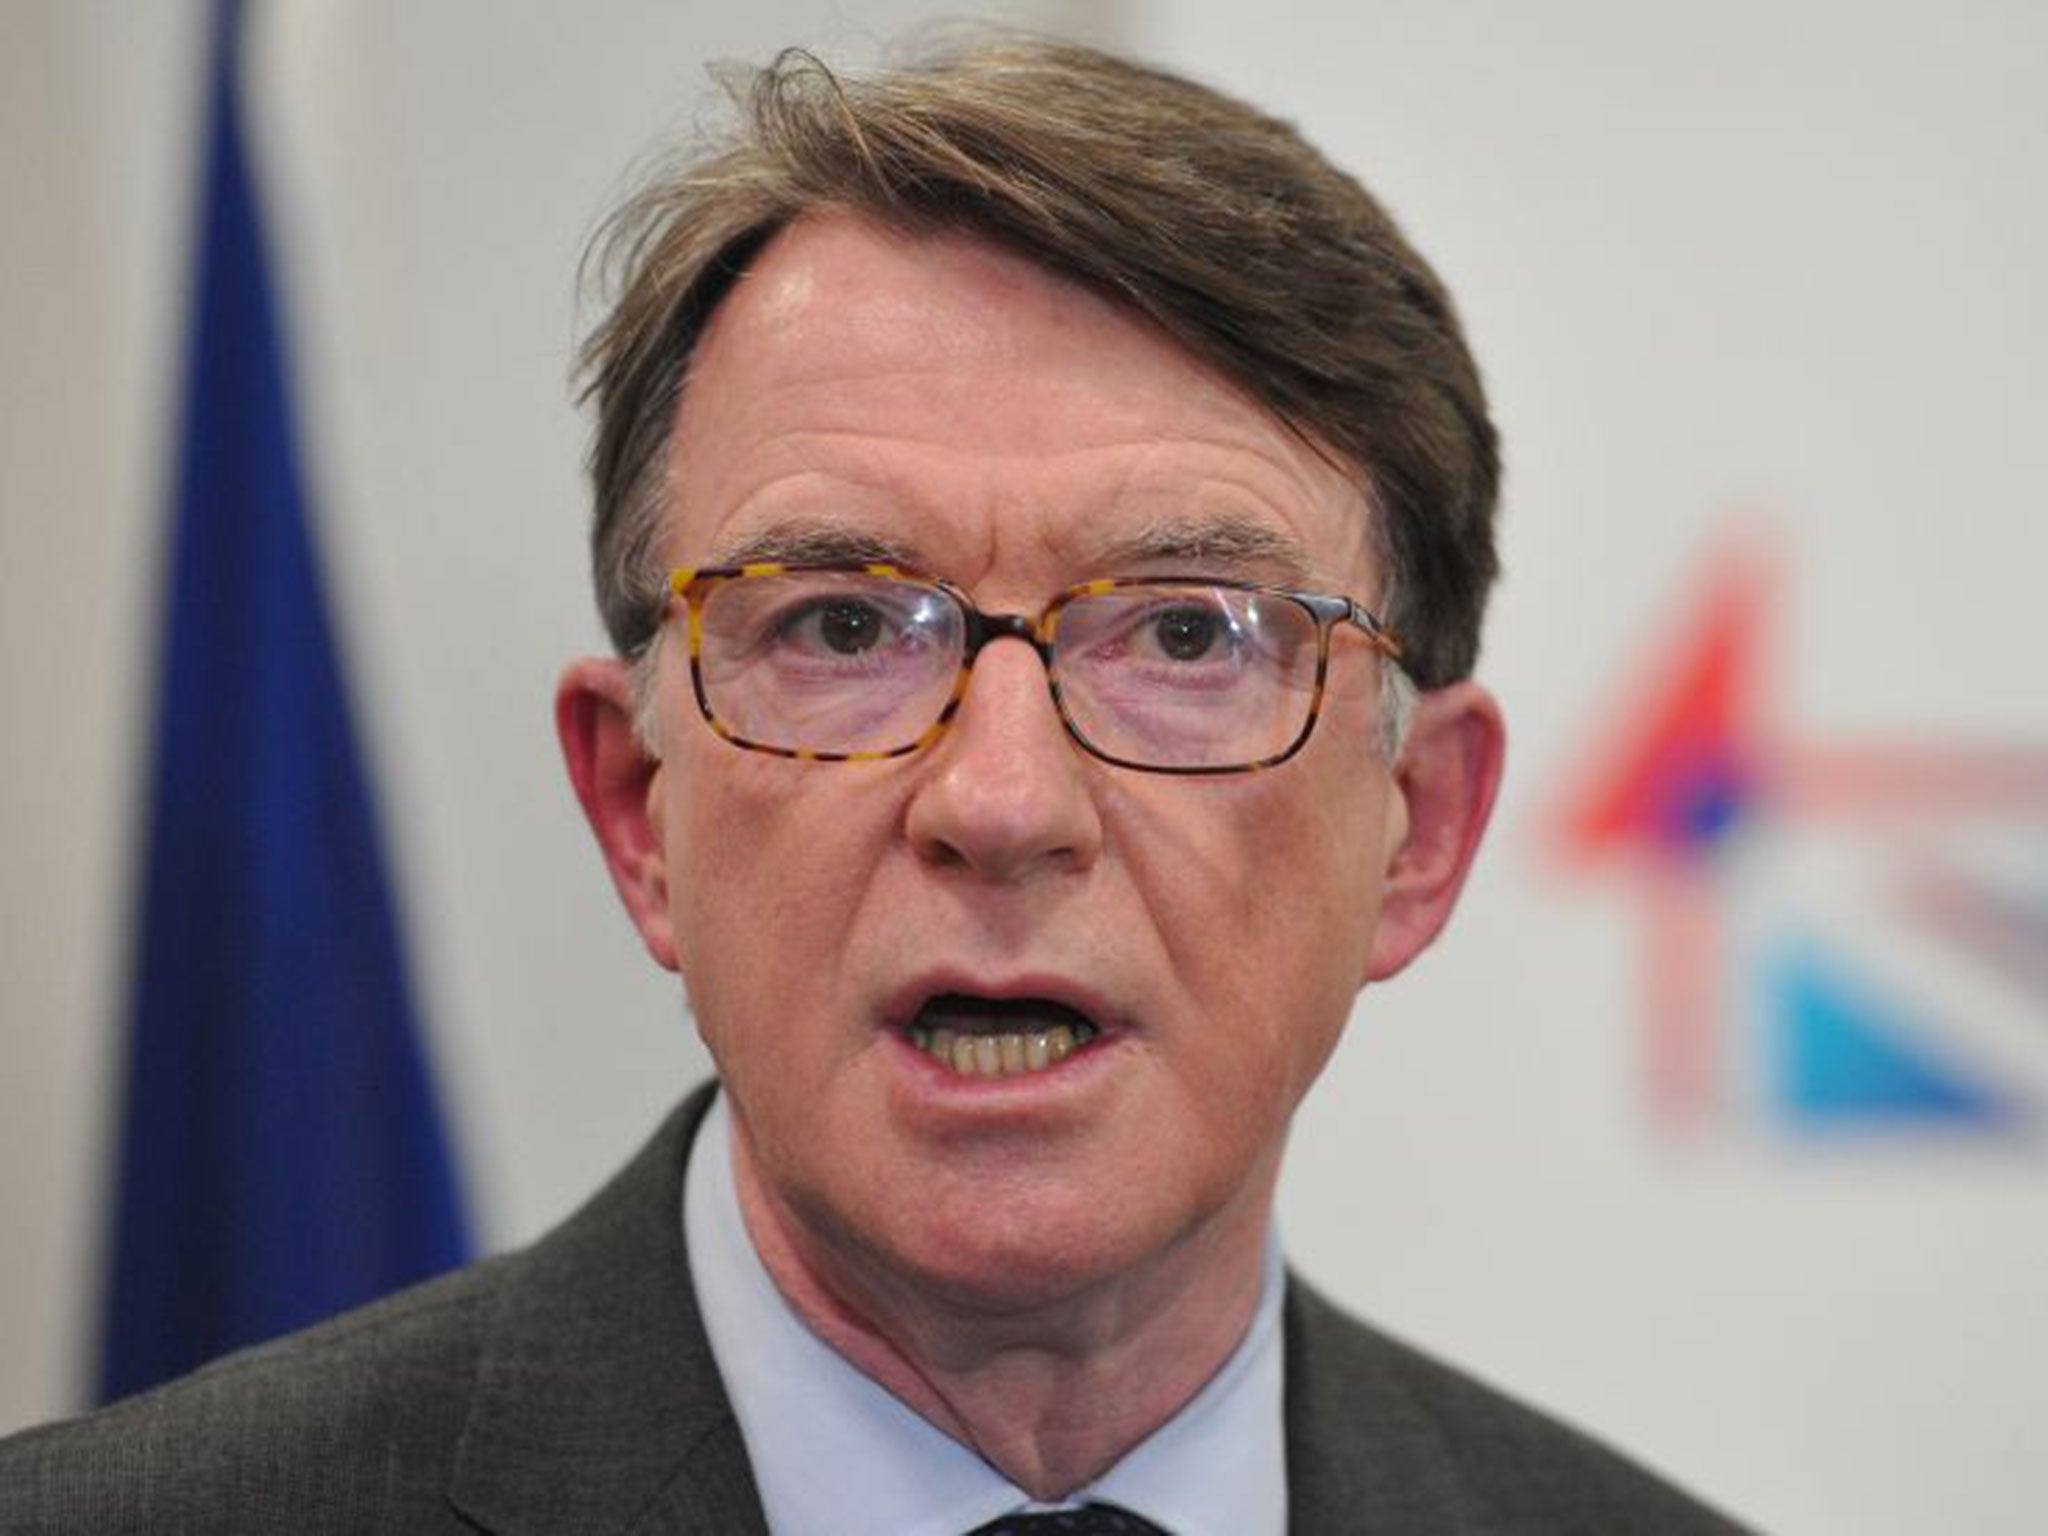 Lord Mandelson will warn that the UK might have to raise tariffs on imported goods while new trade deals are agreed